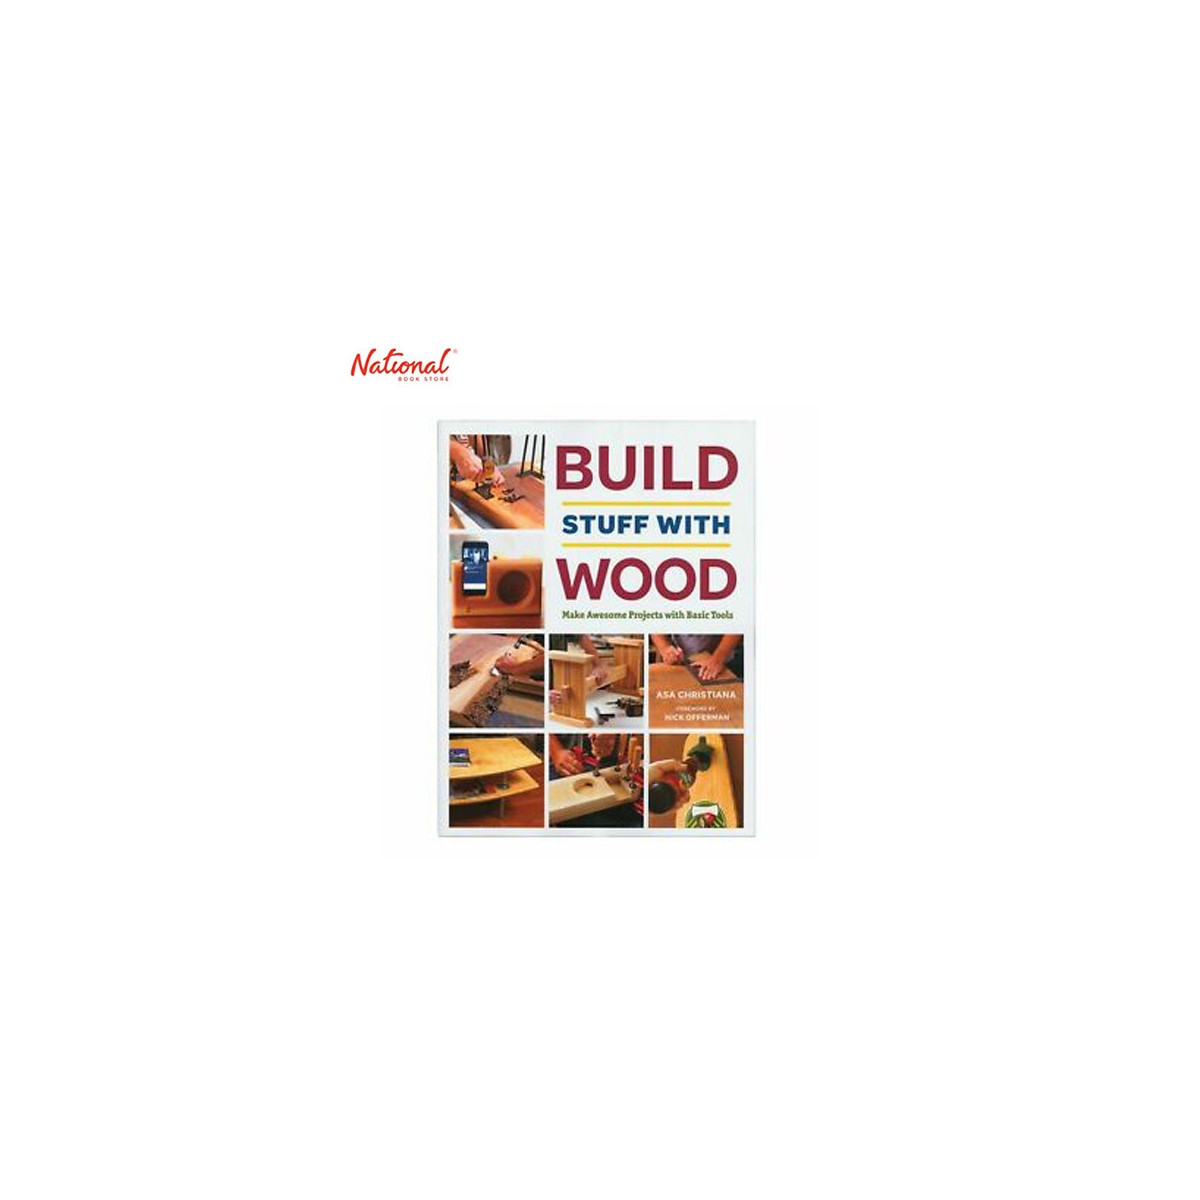 BUILD STUFF WITH WOODD: MAKE AWESOME PROJECTS WITH BASIC TOOLS